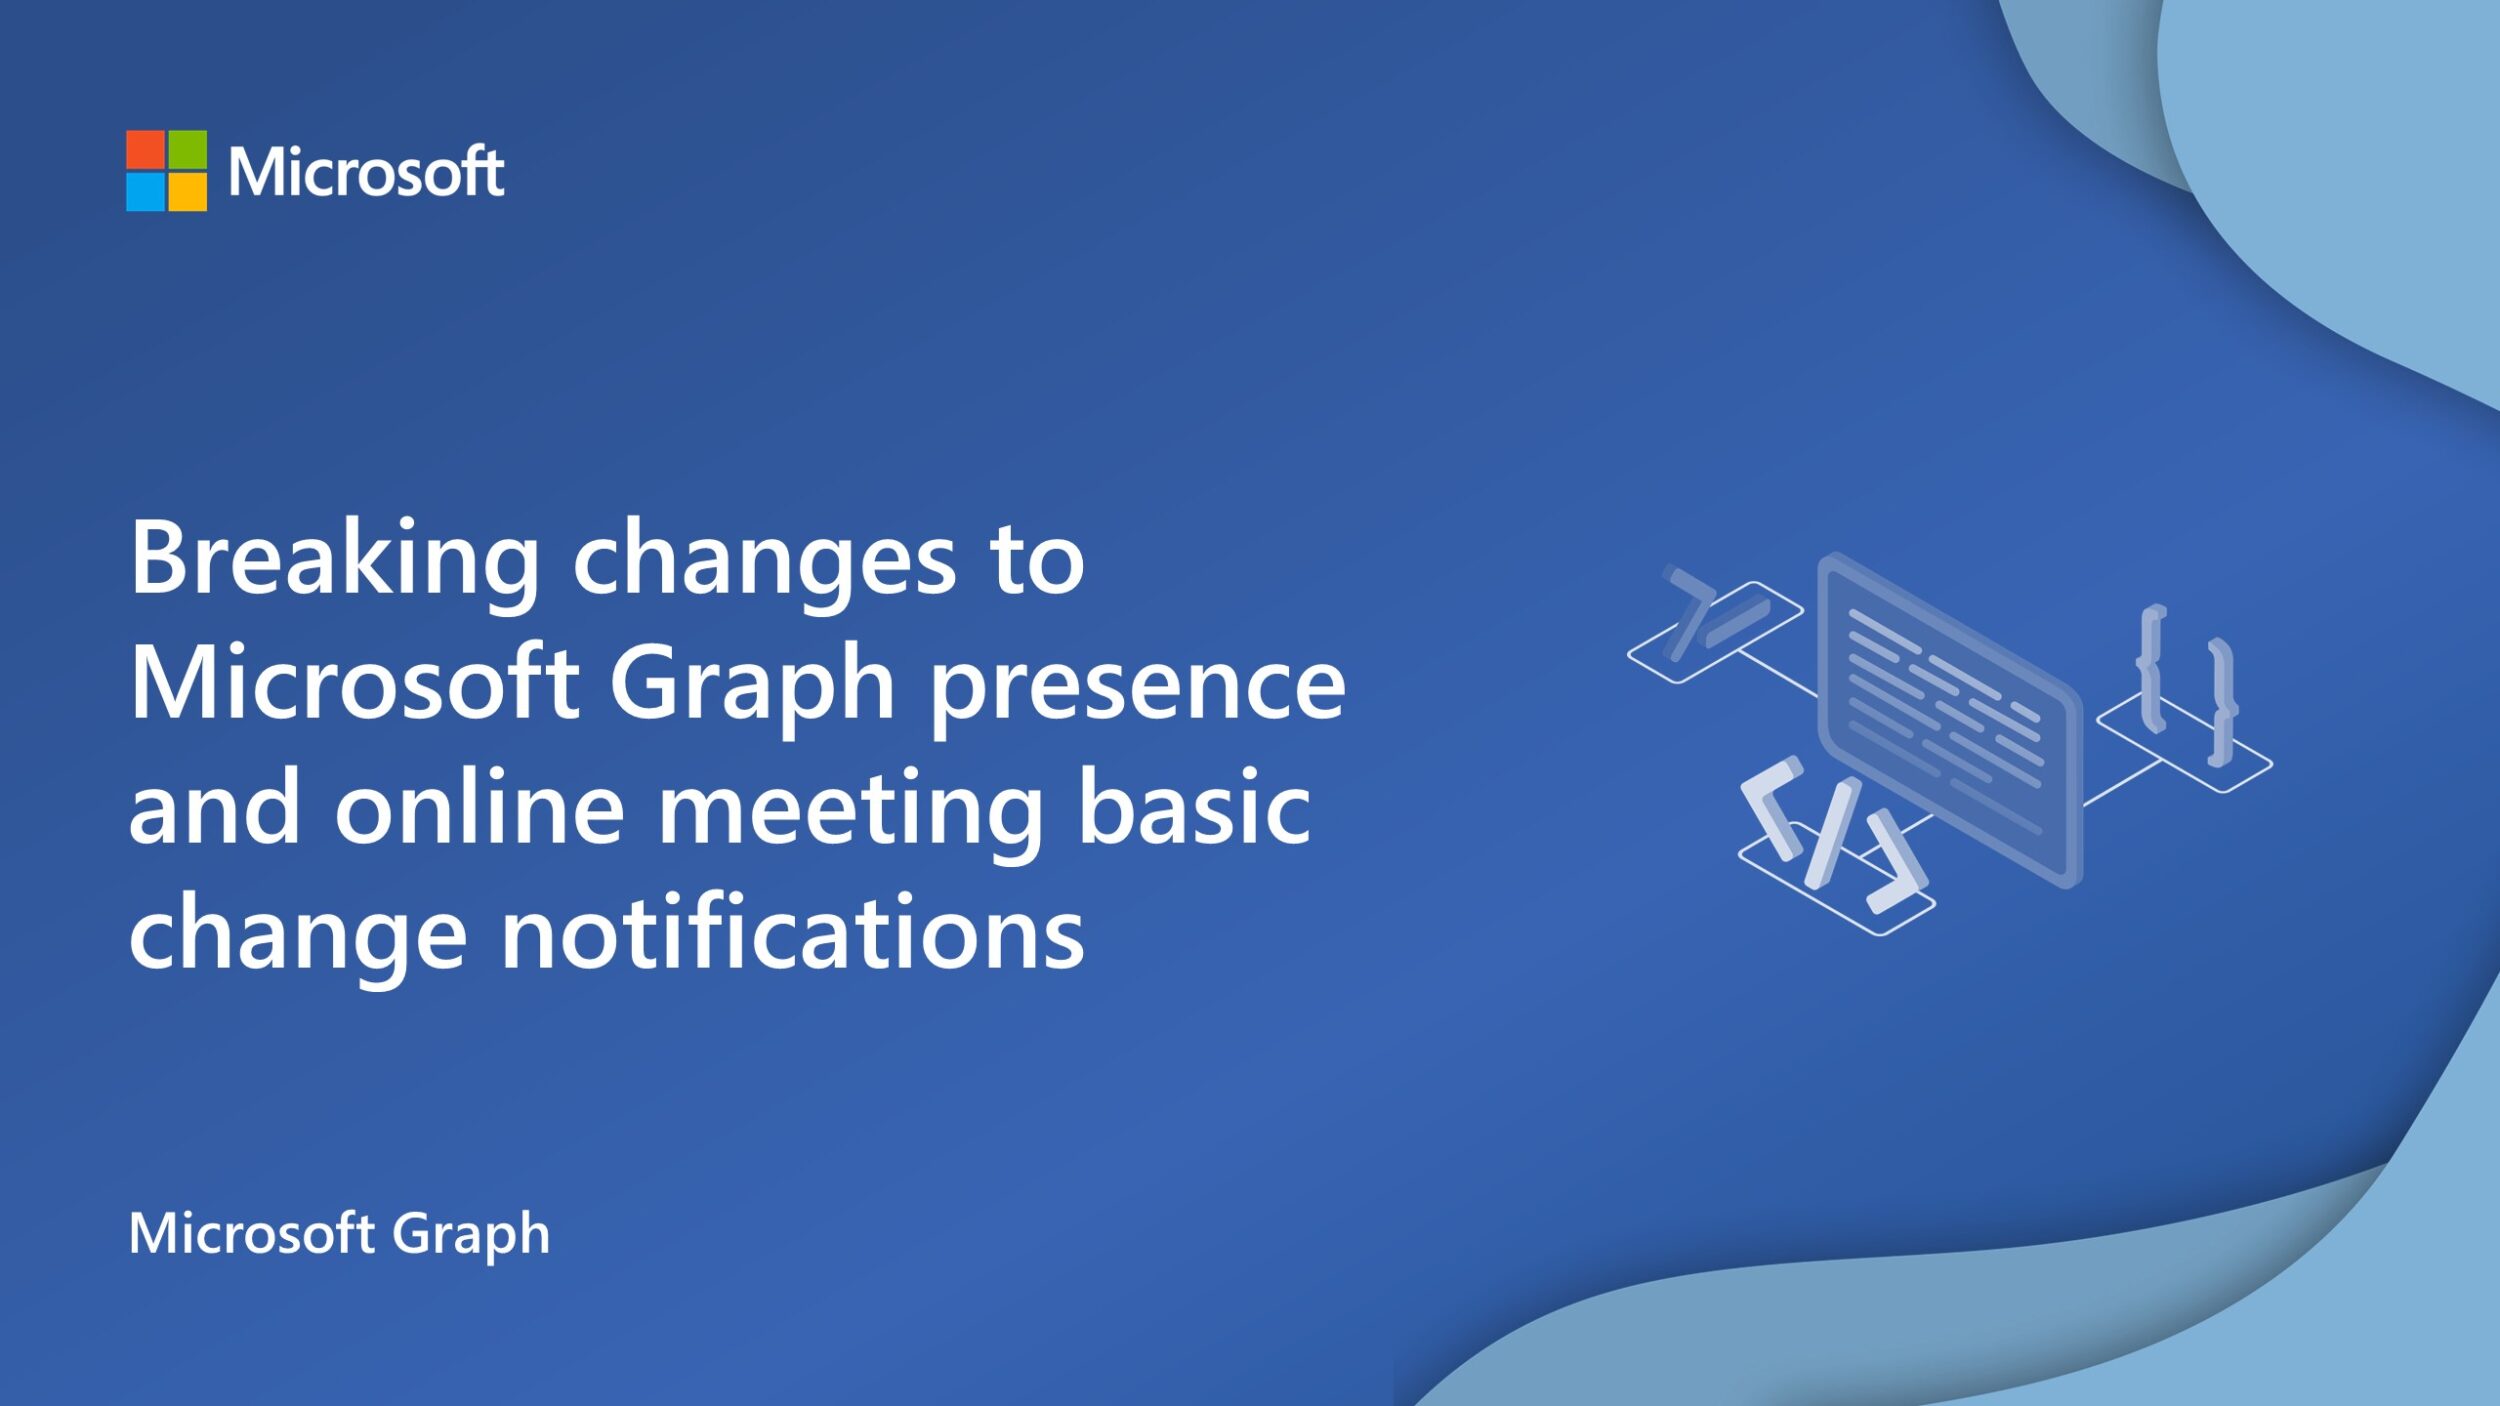 Breaking changes to Microsoft Graph presence and online meeting basic change notifications